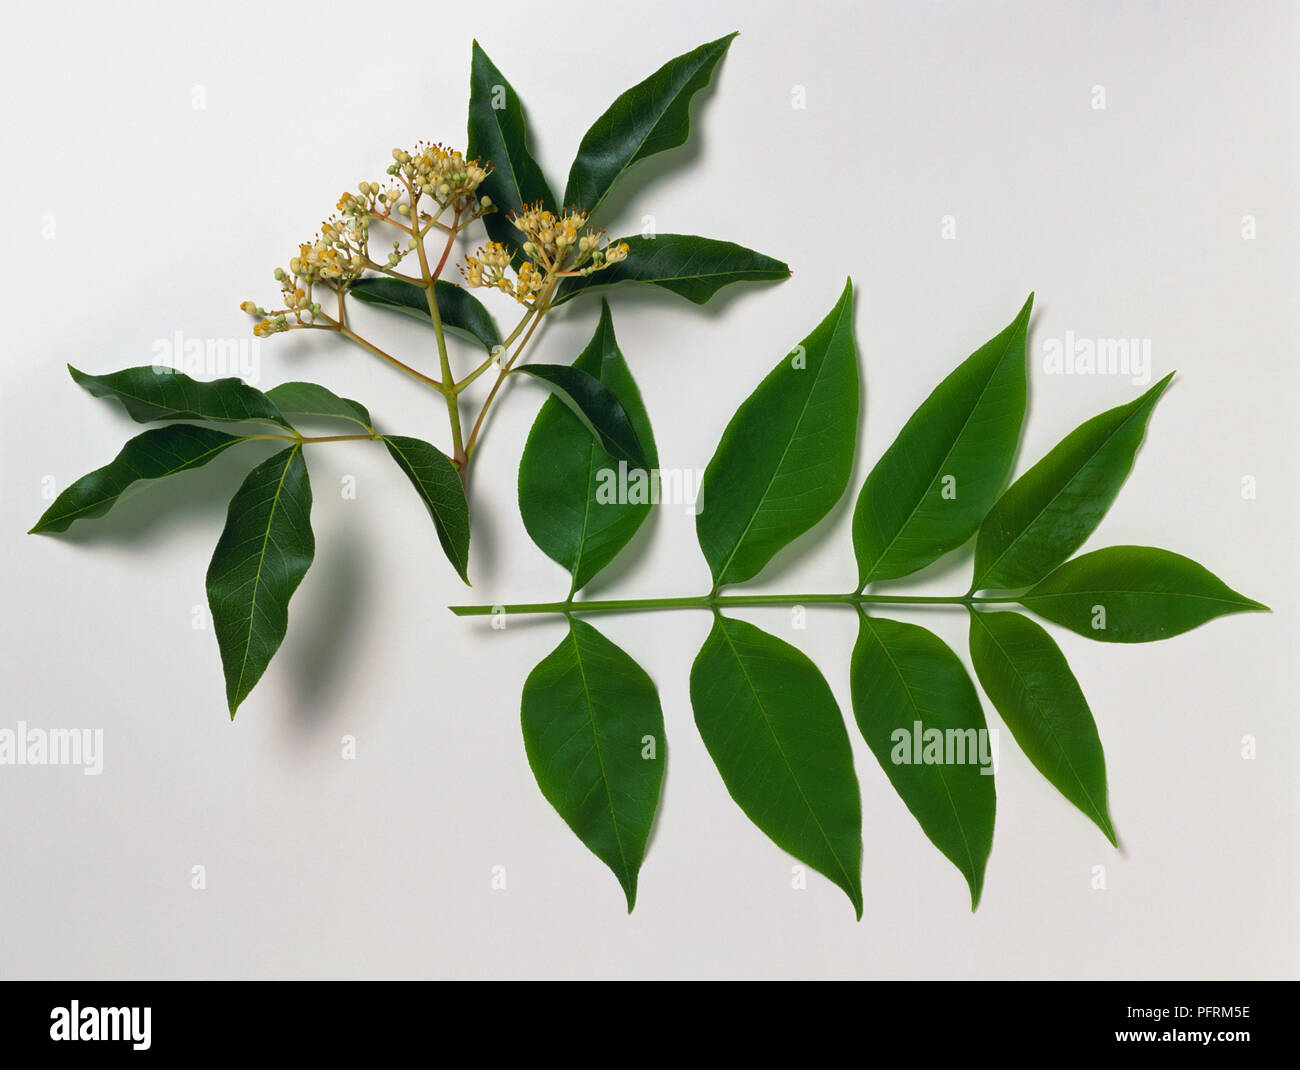 Tetradium daniellii, stems with leaves and flowers Stock Photo